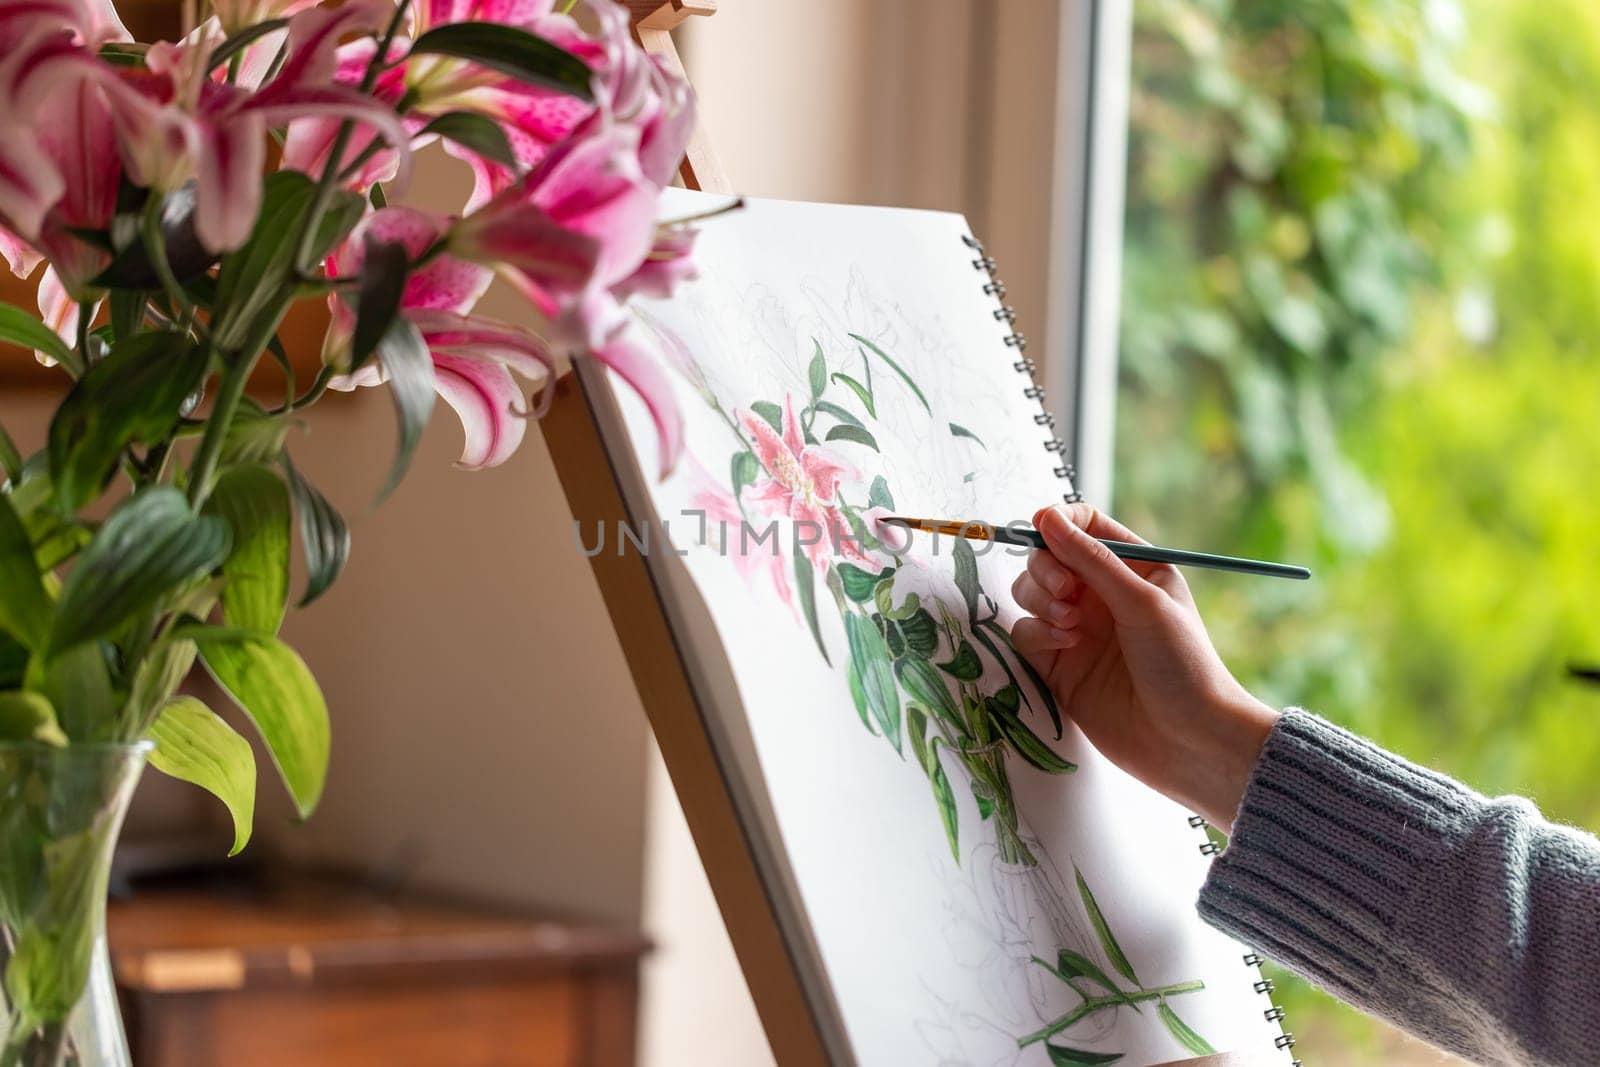 Young girl painting still life with flowers, purple lilies, with watercolor paints on the easel at home